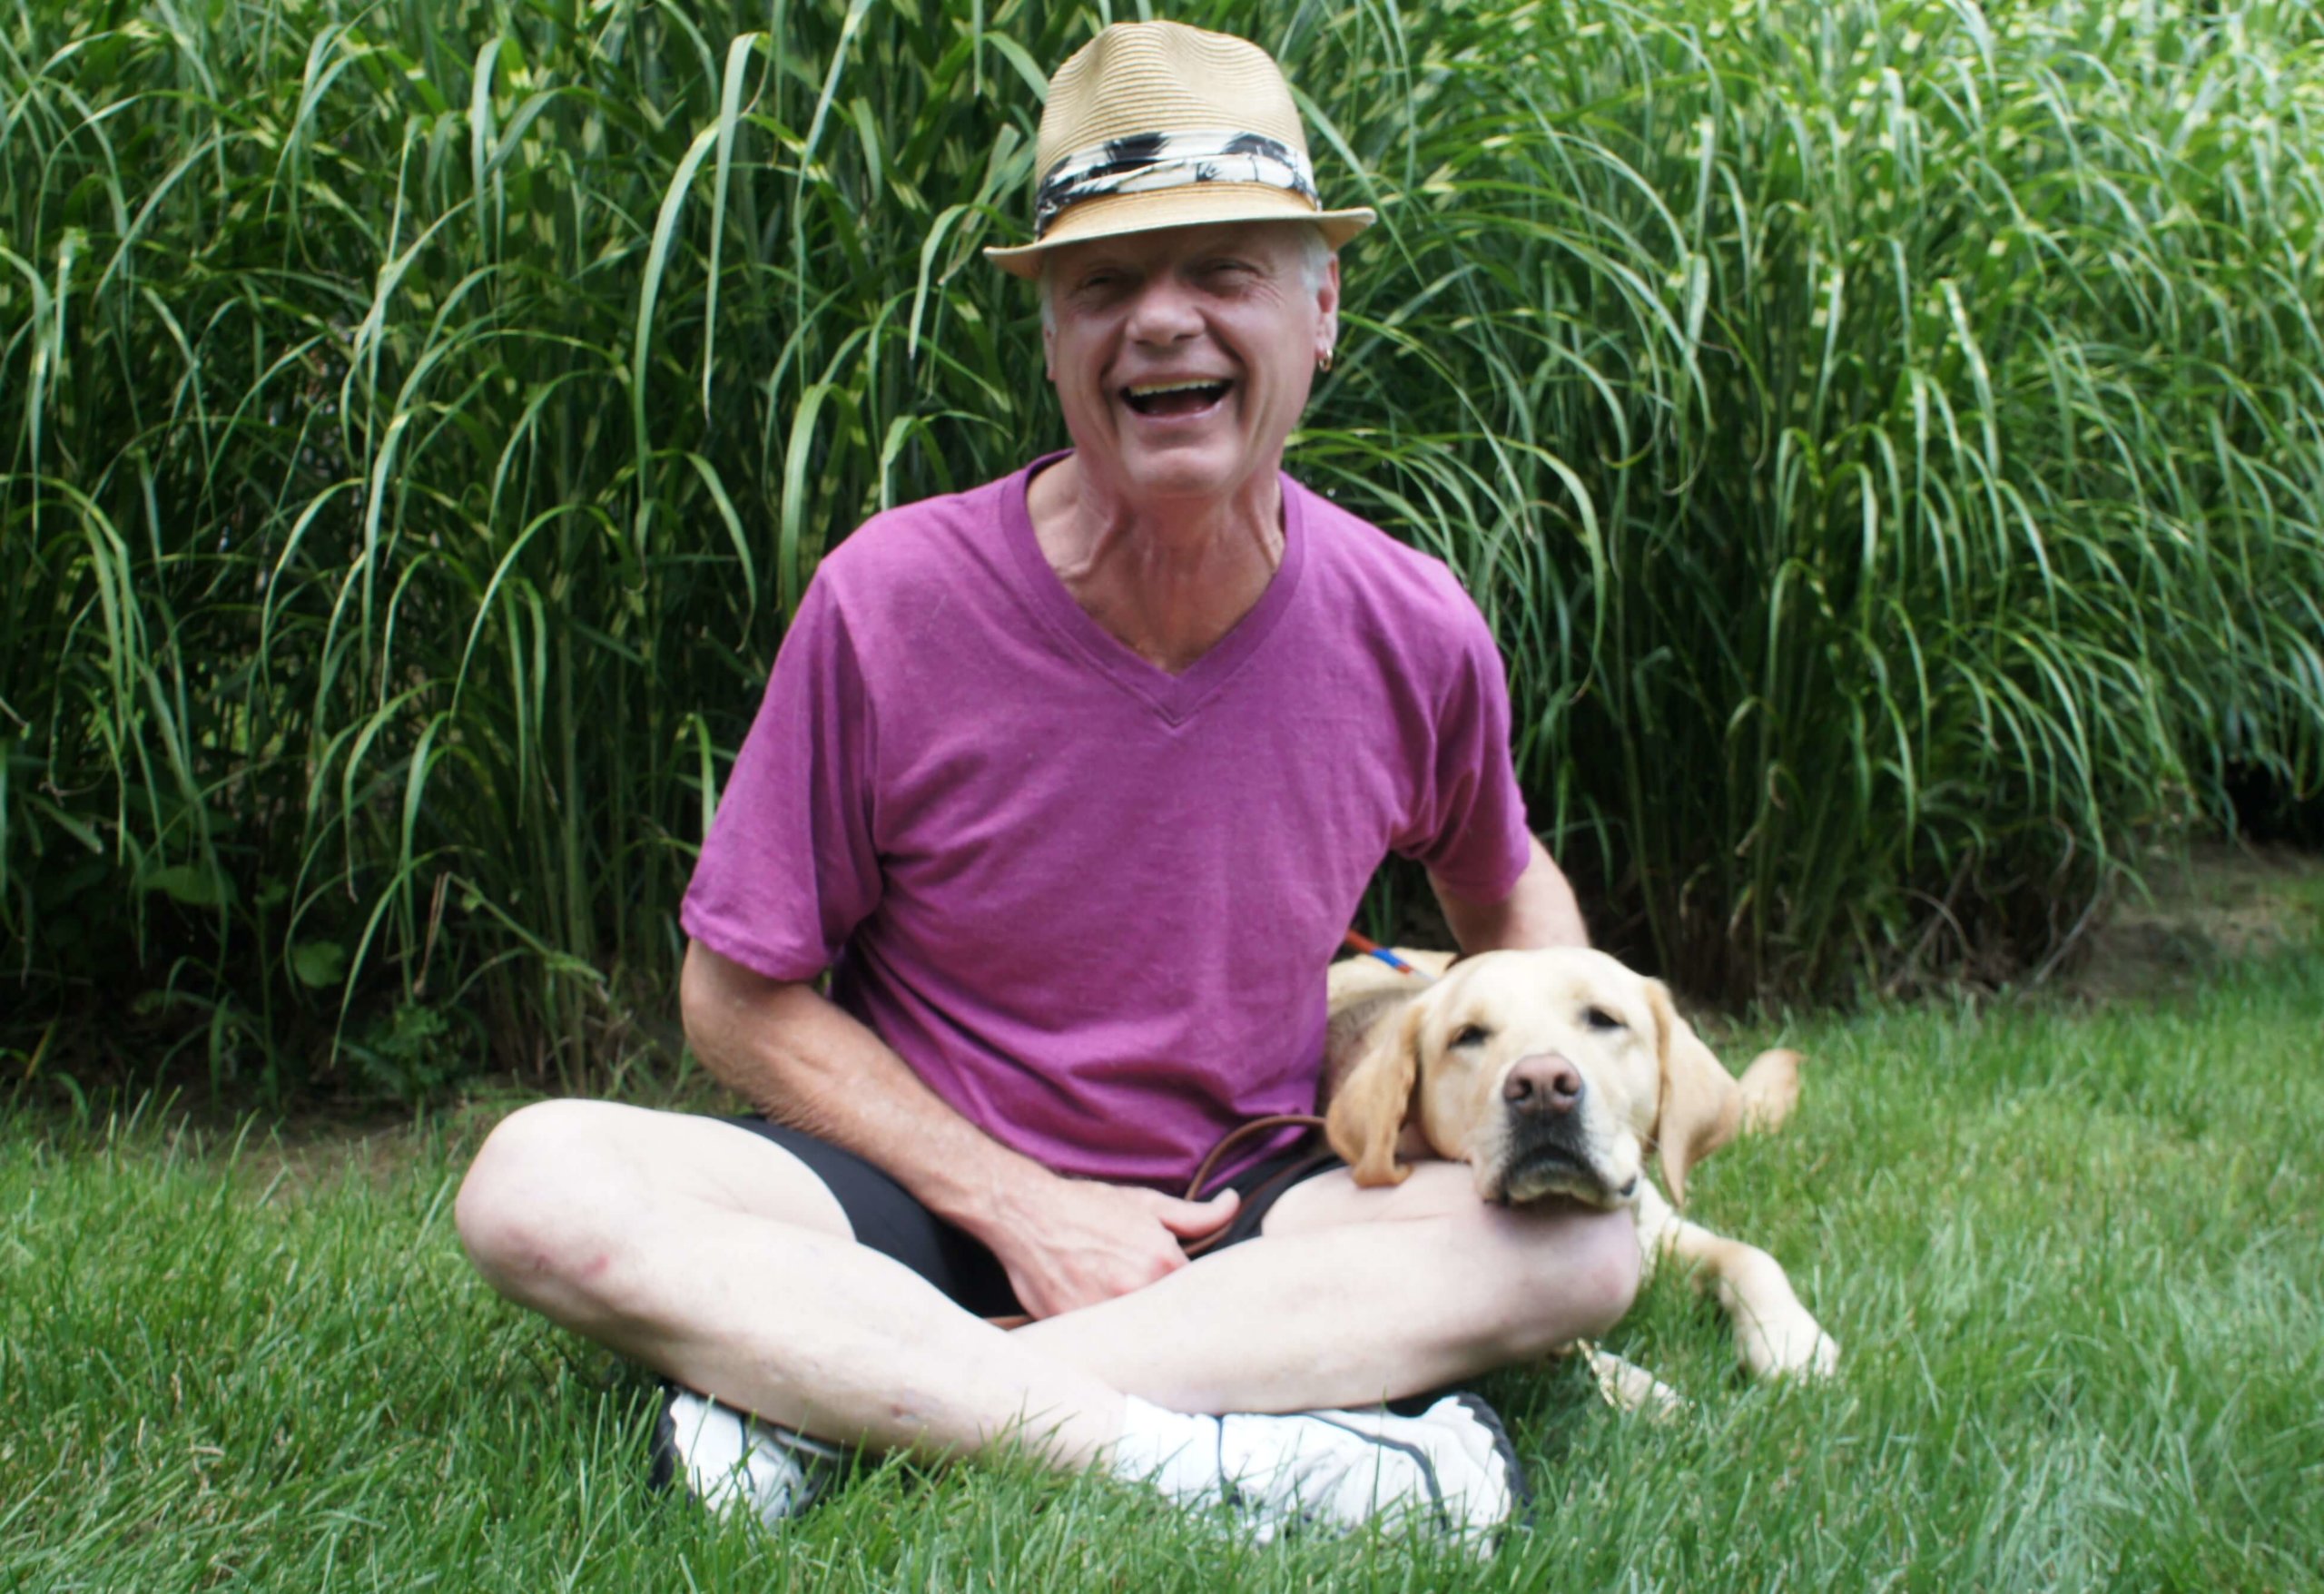 July graduate Doug and guide dog Kimberly sit in the grass together